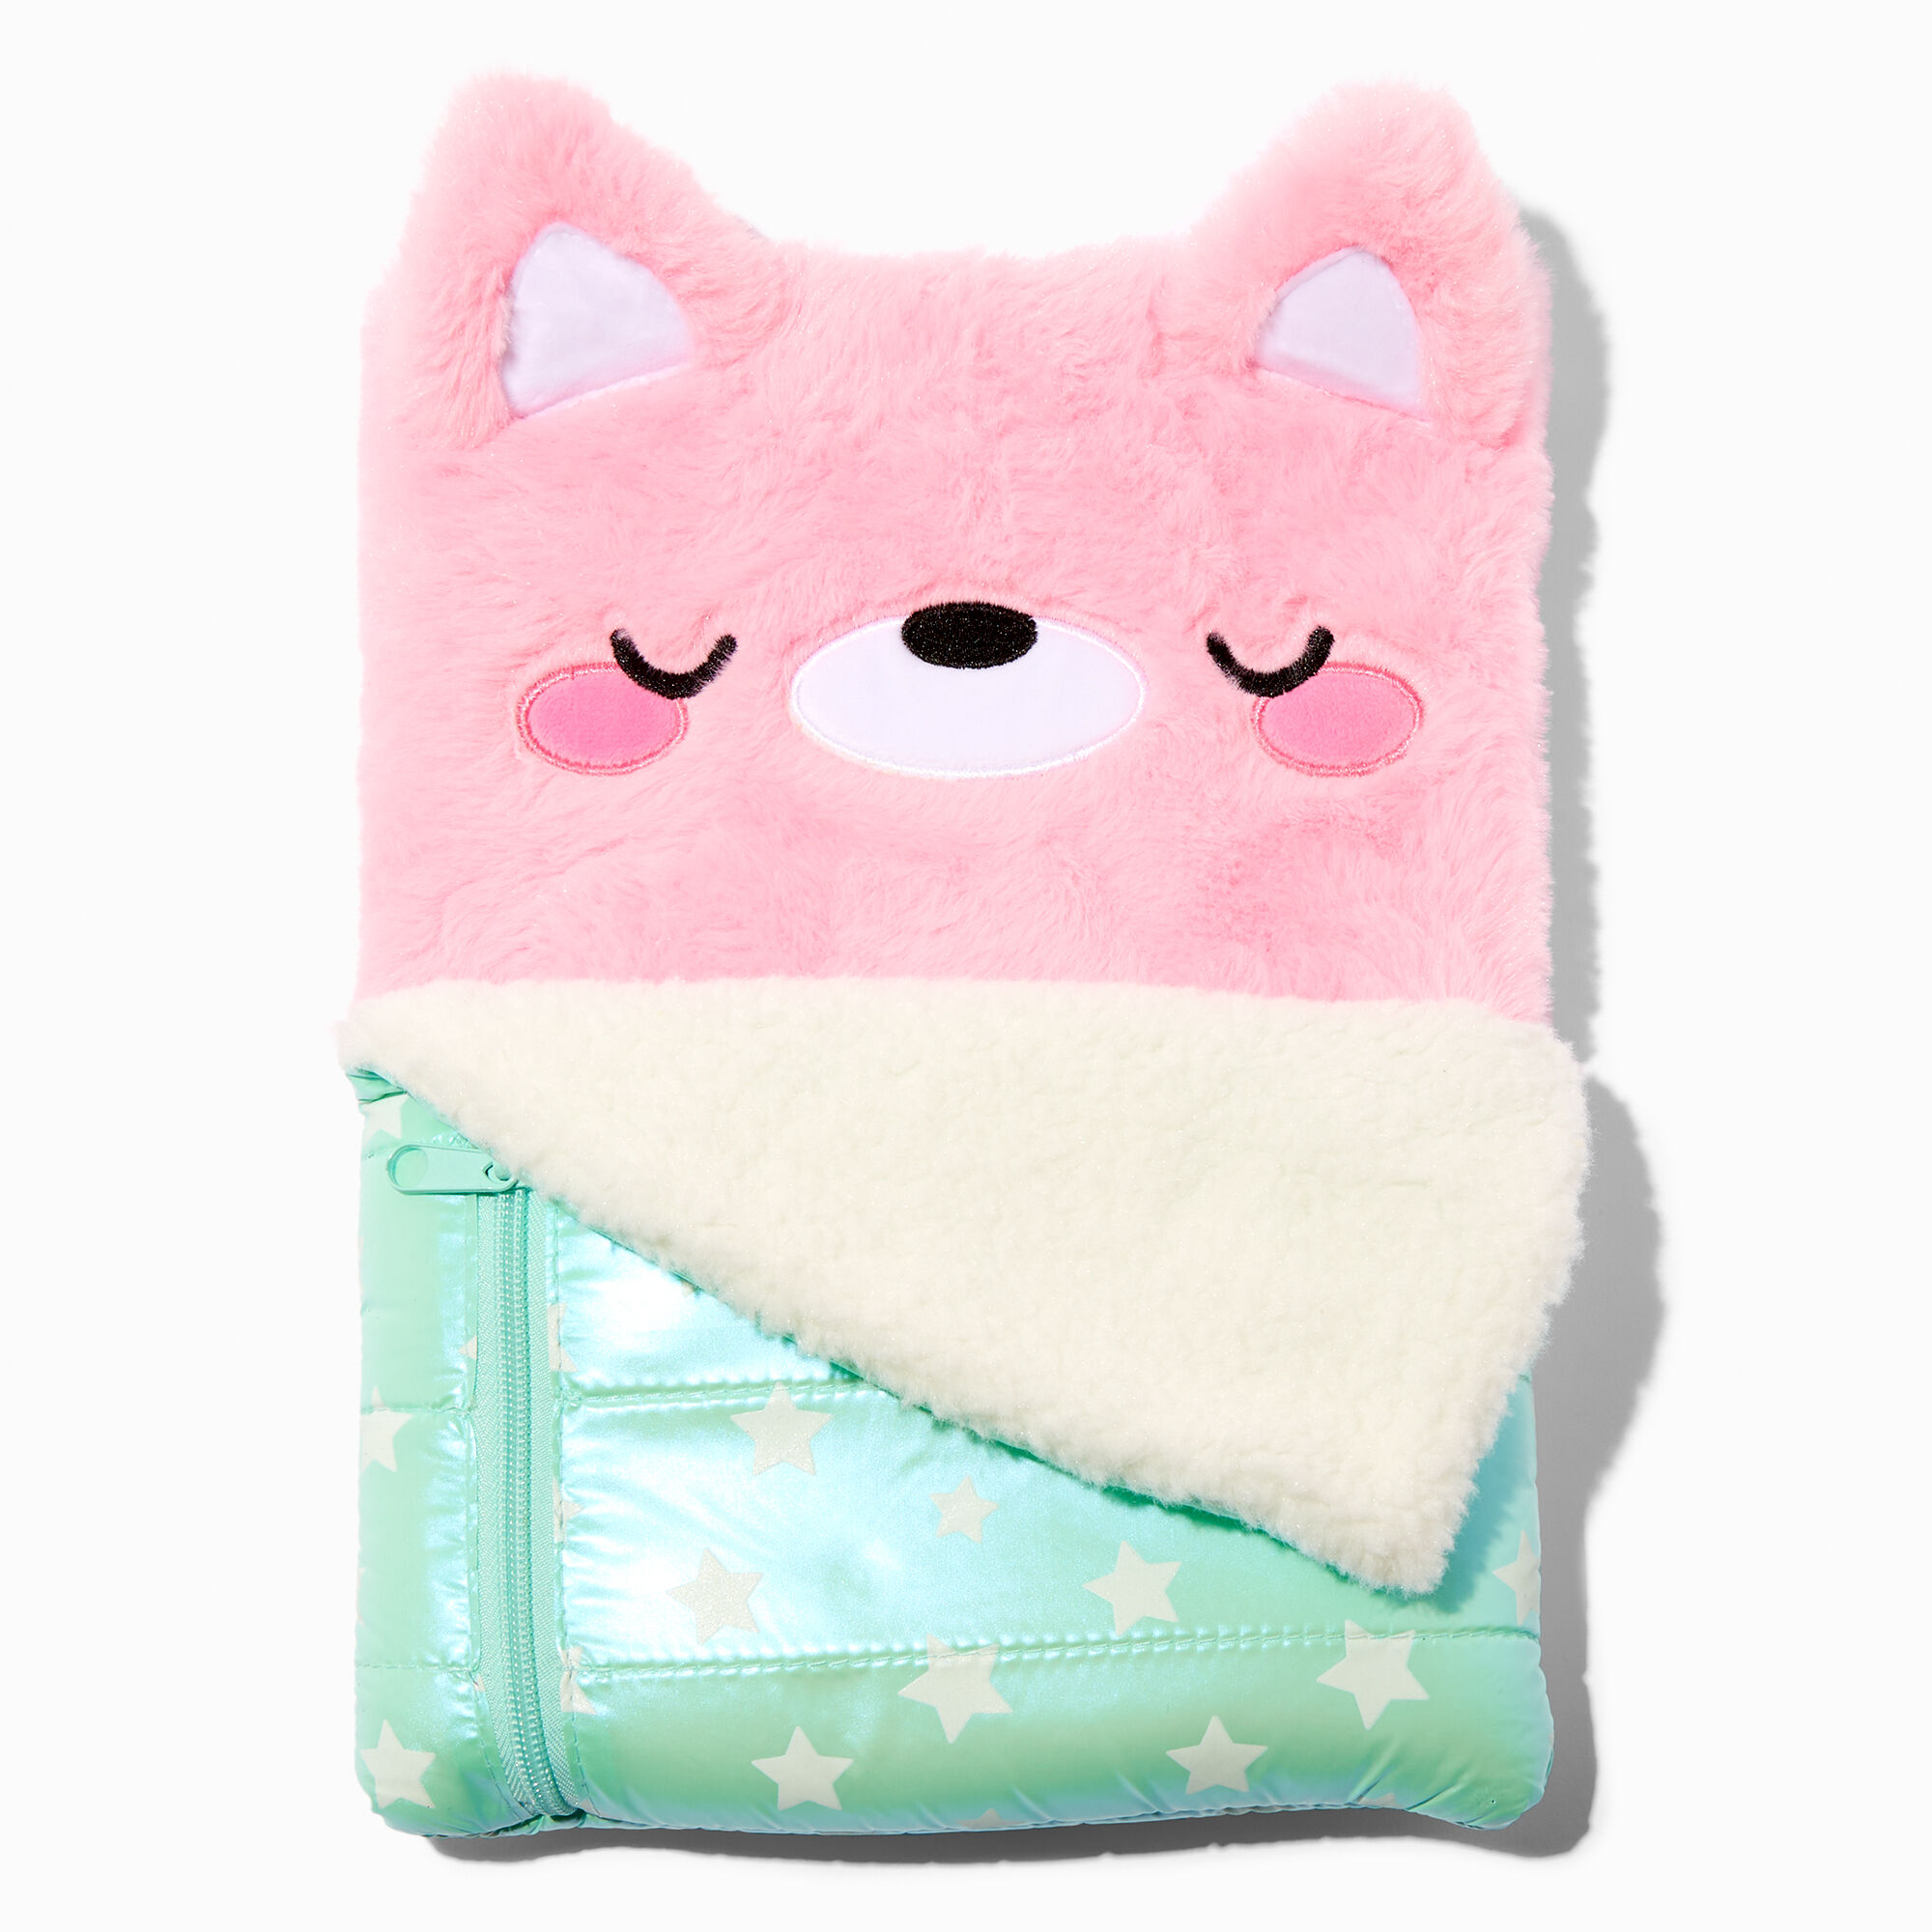 View Claires Sleepy Cat Plush Sketchbook Pink information